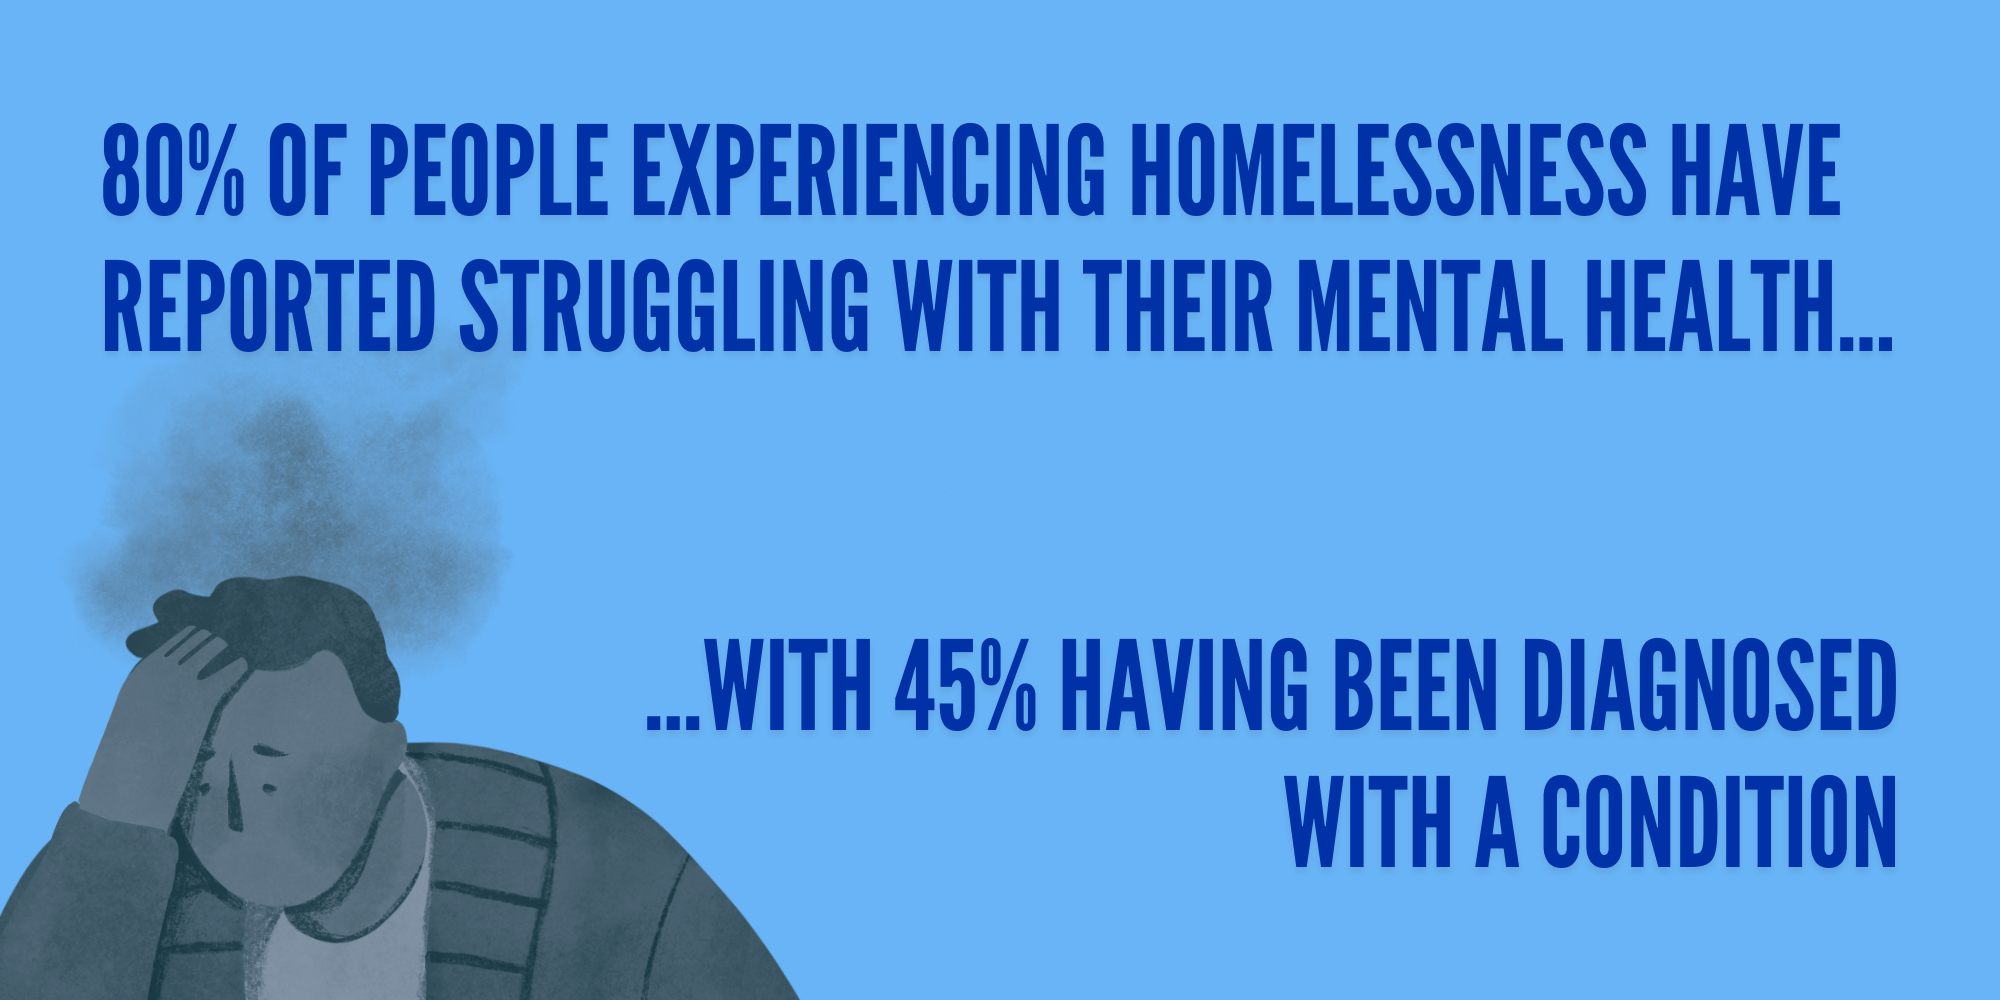 80% of people experiencing homelessness report mental health issues